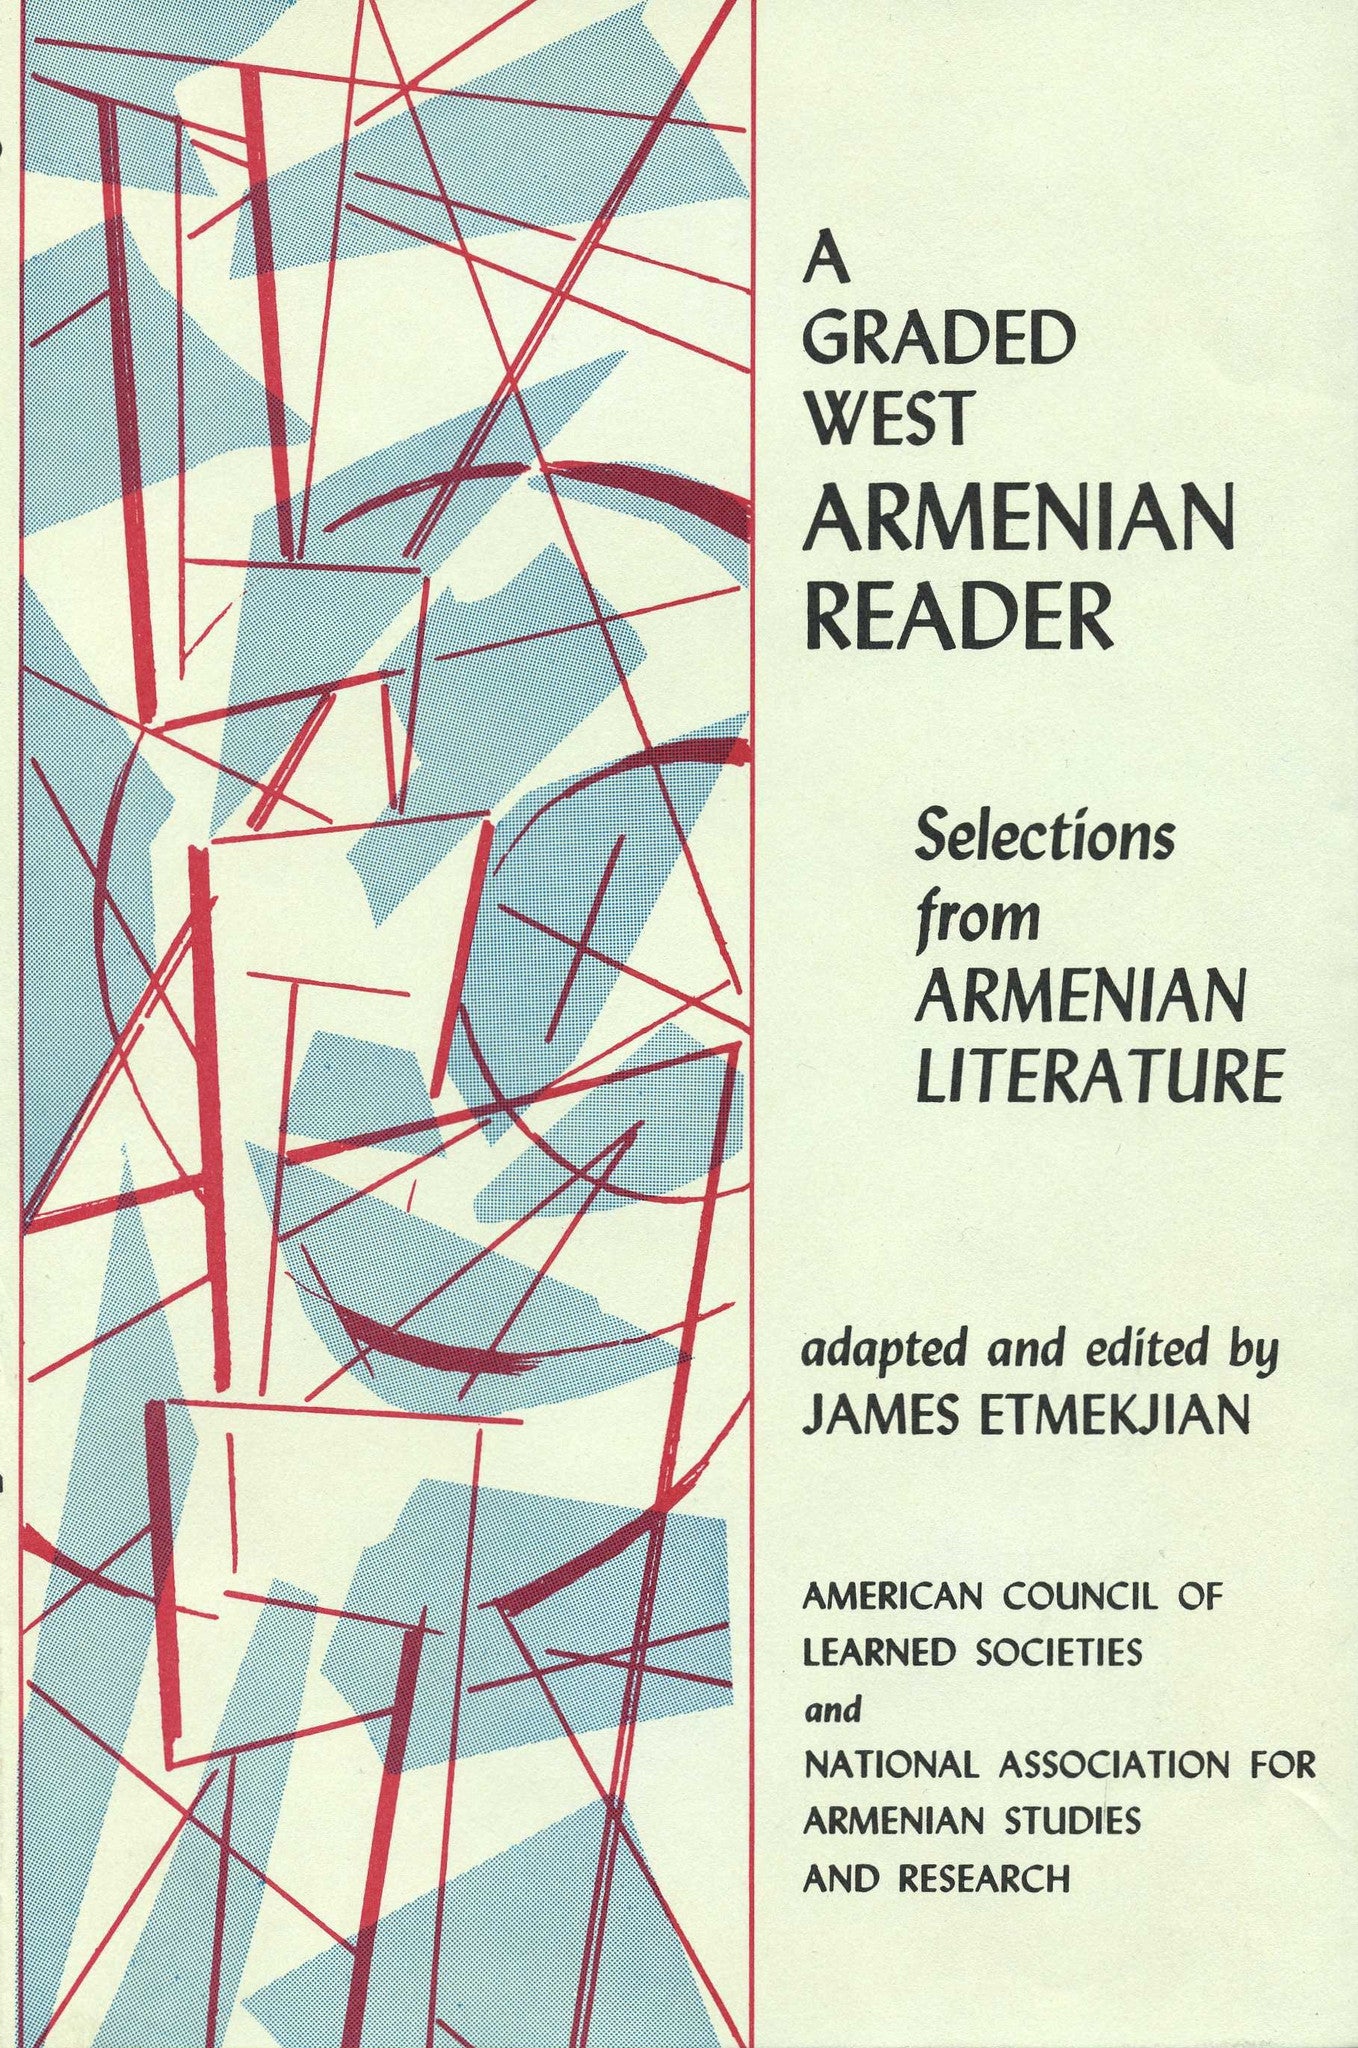 A Graded West Armenian Reader: Selections from Armenian Literature